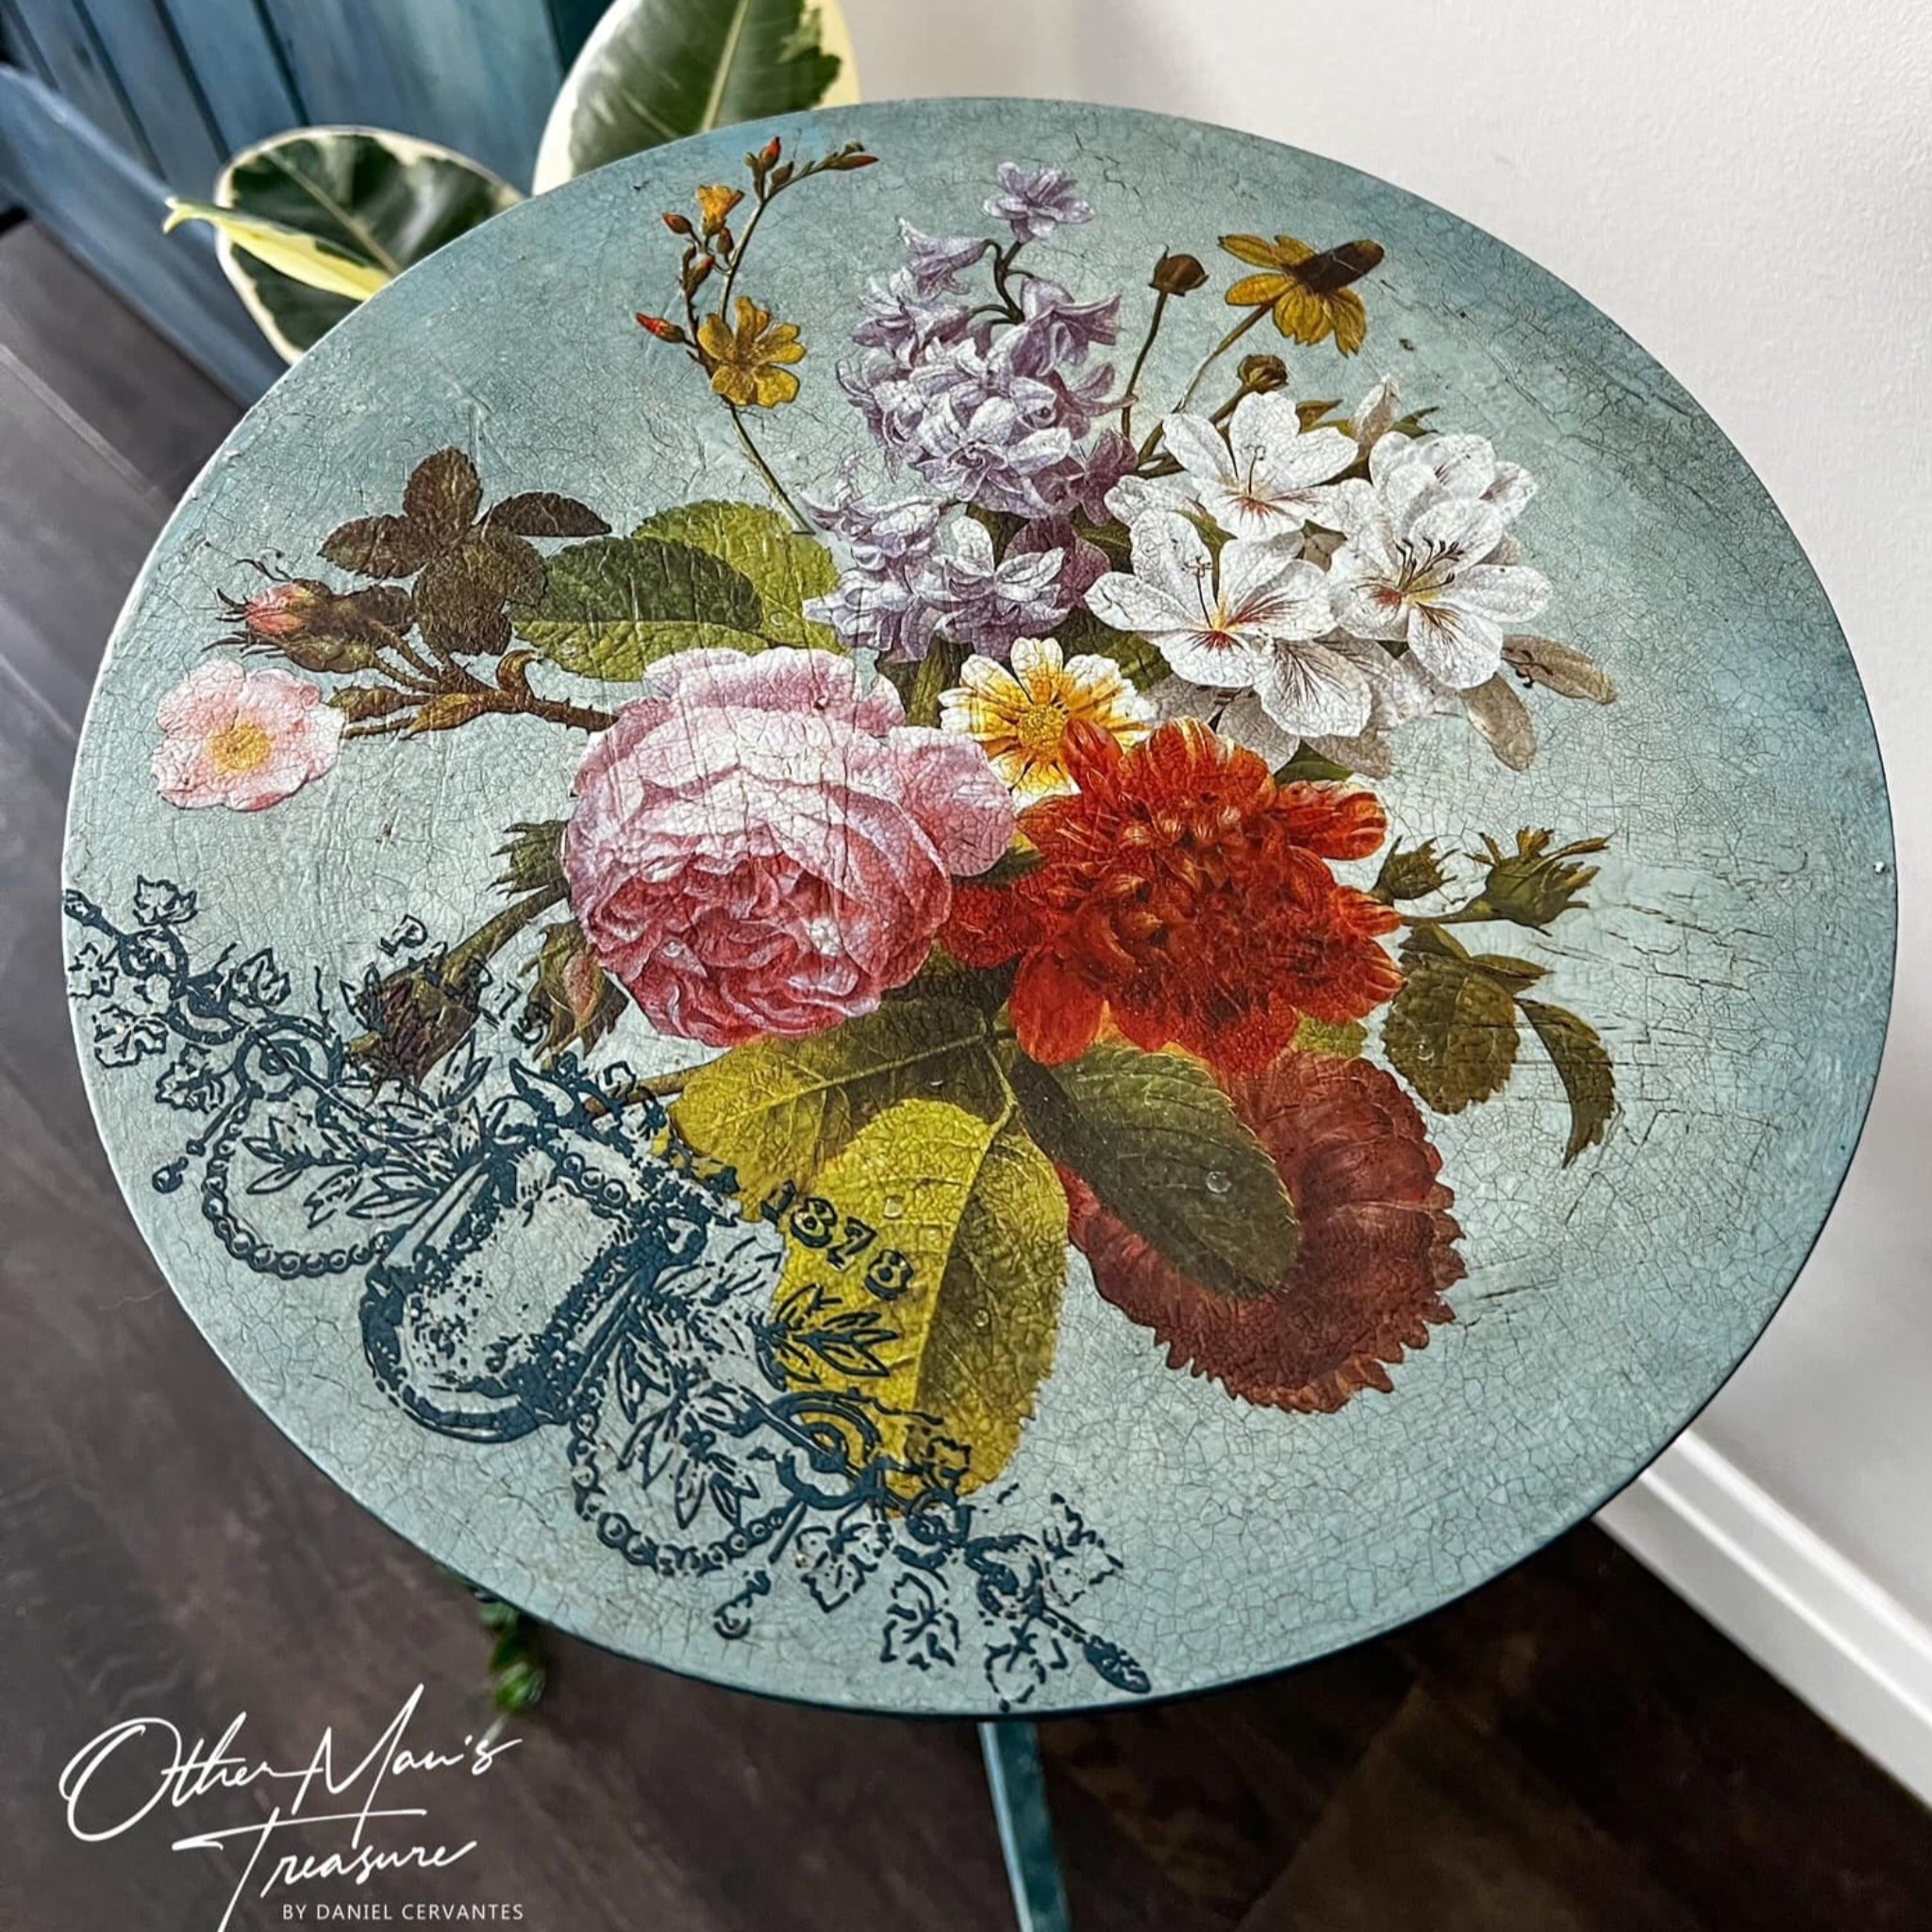 An arial view of a vintage plant stand refurbished by Other Man's Treasure is painted a crackle light blue and features ReDesign with Prima's Blossomed Beauties small transfer on it.